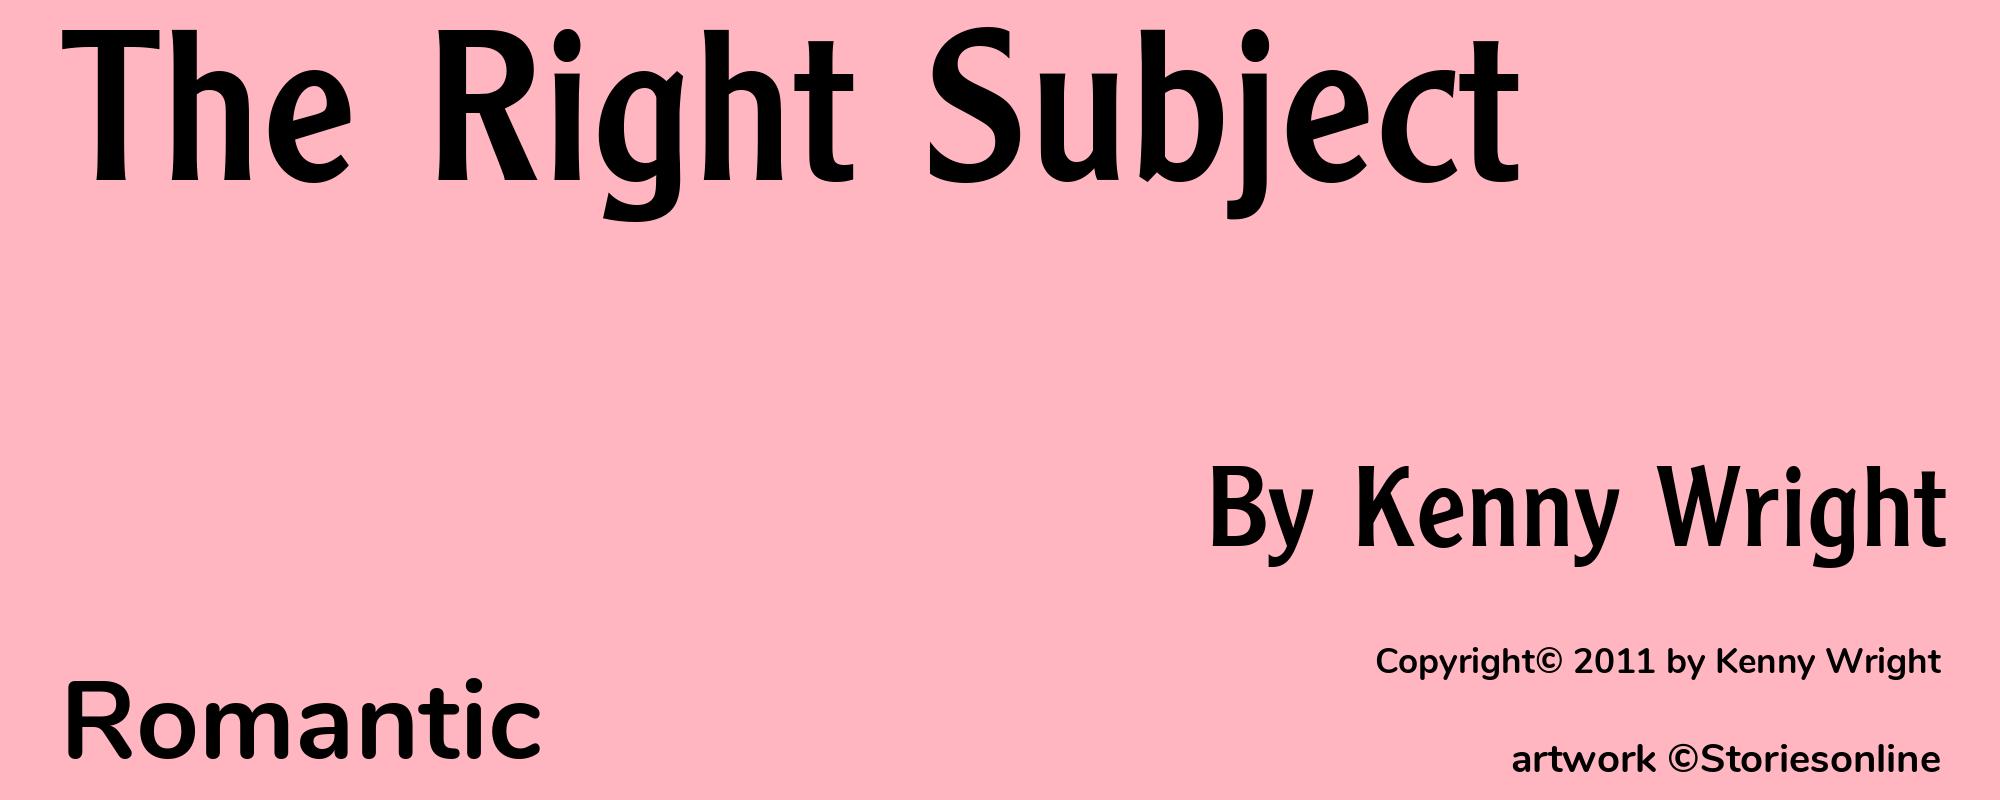 The Right Subject - Cover